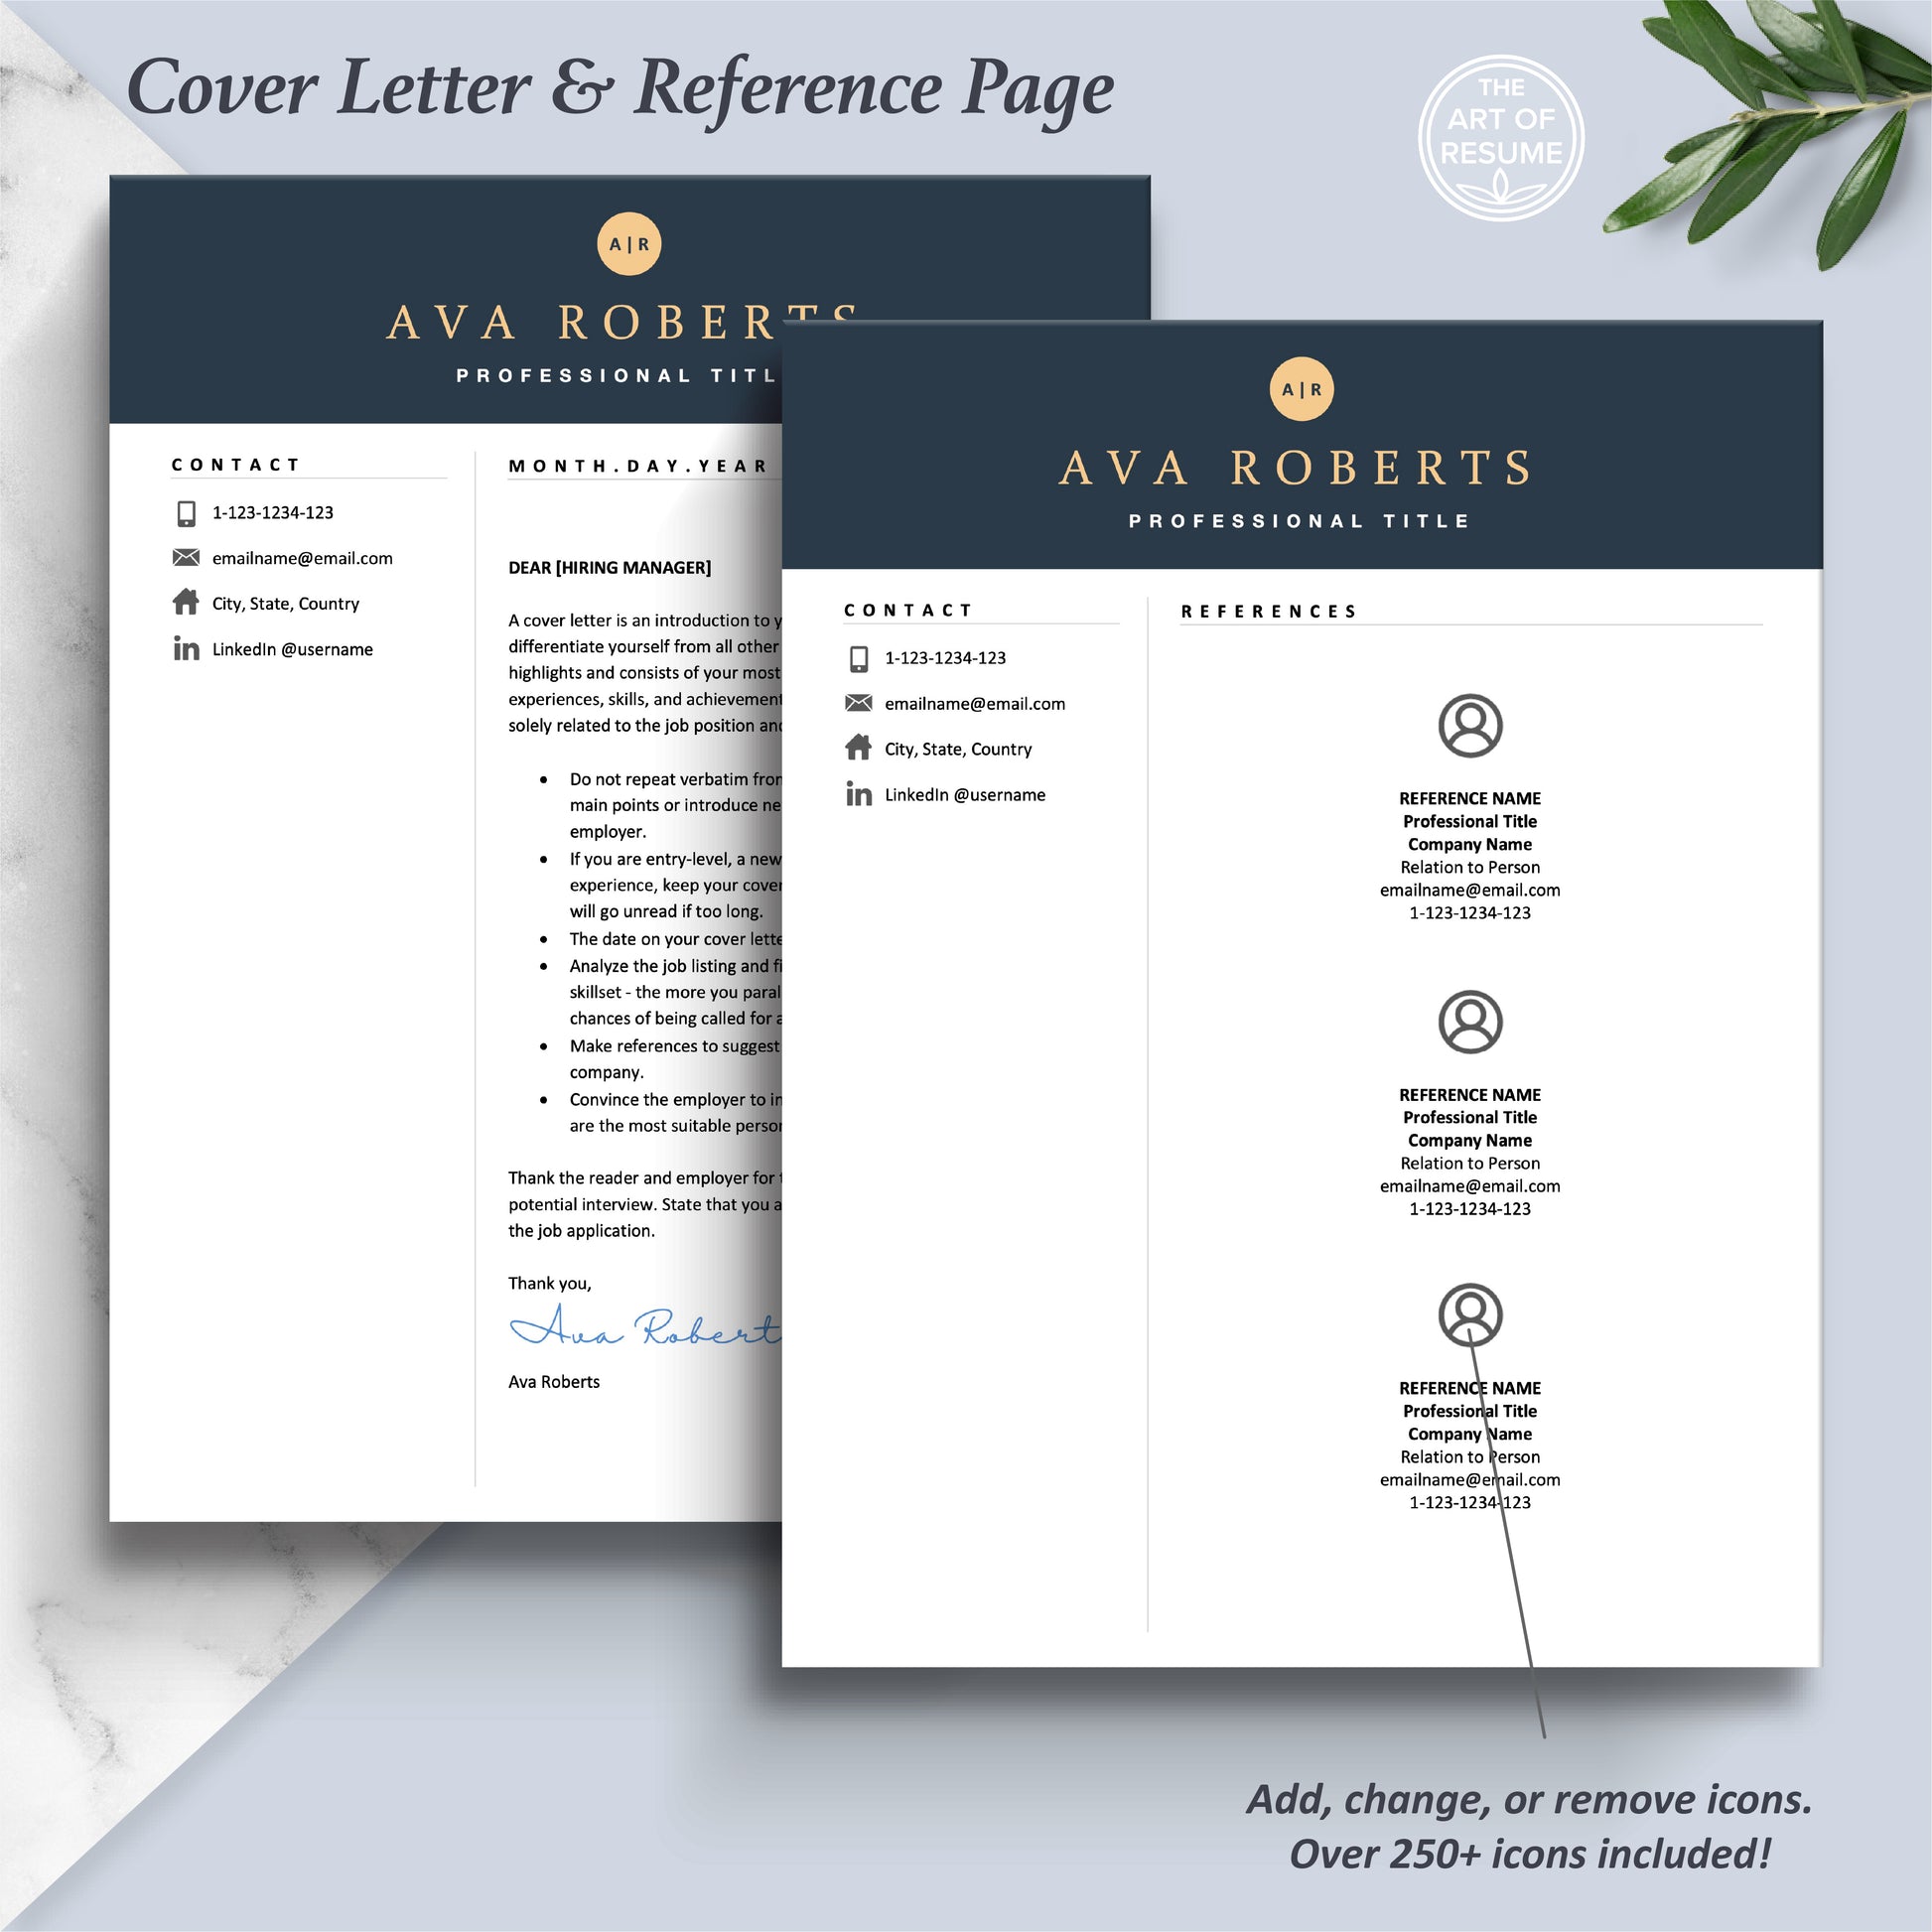 The Art of Resume Templates | Professional Simple Resume CV Design Cover Letter and Reference Page Design Templates Instant Download